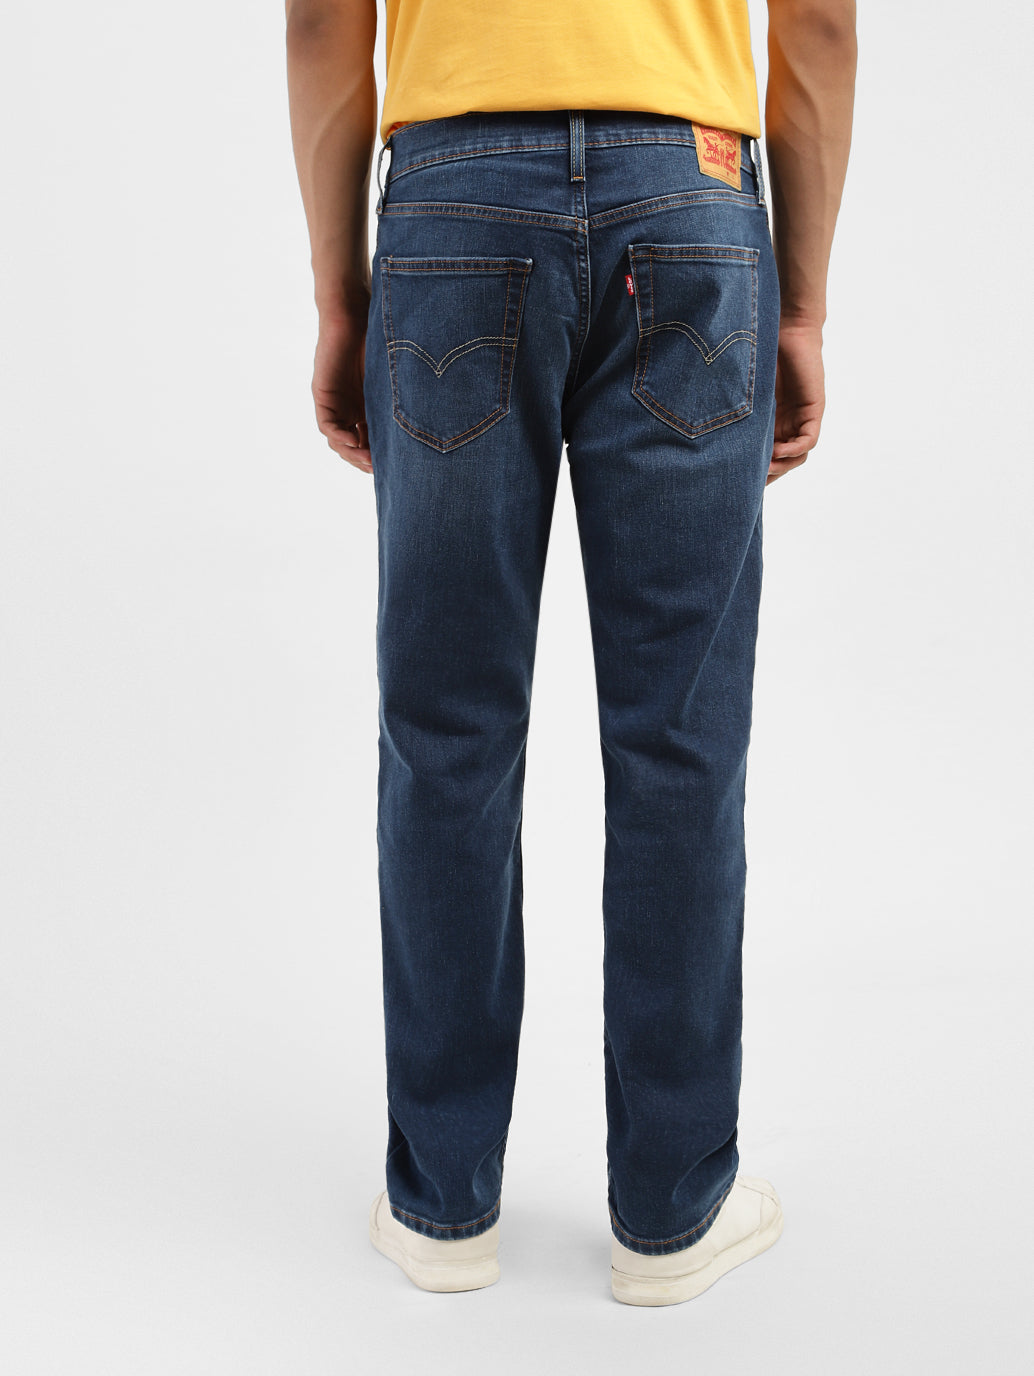 Men's 541 Tapered Fit Jeans